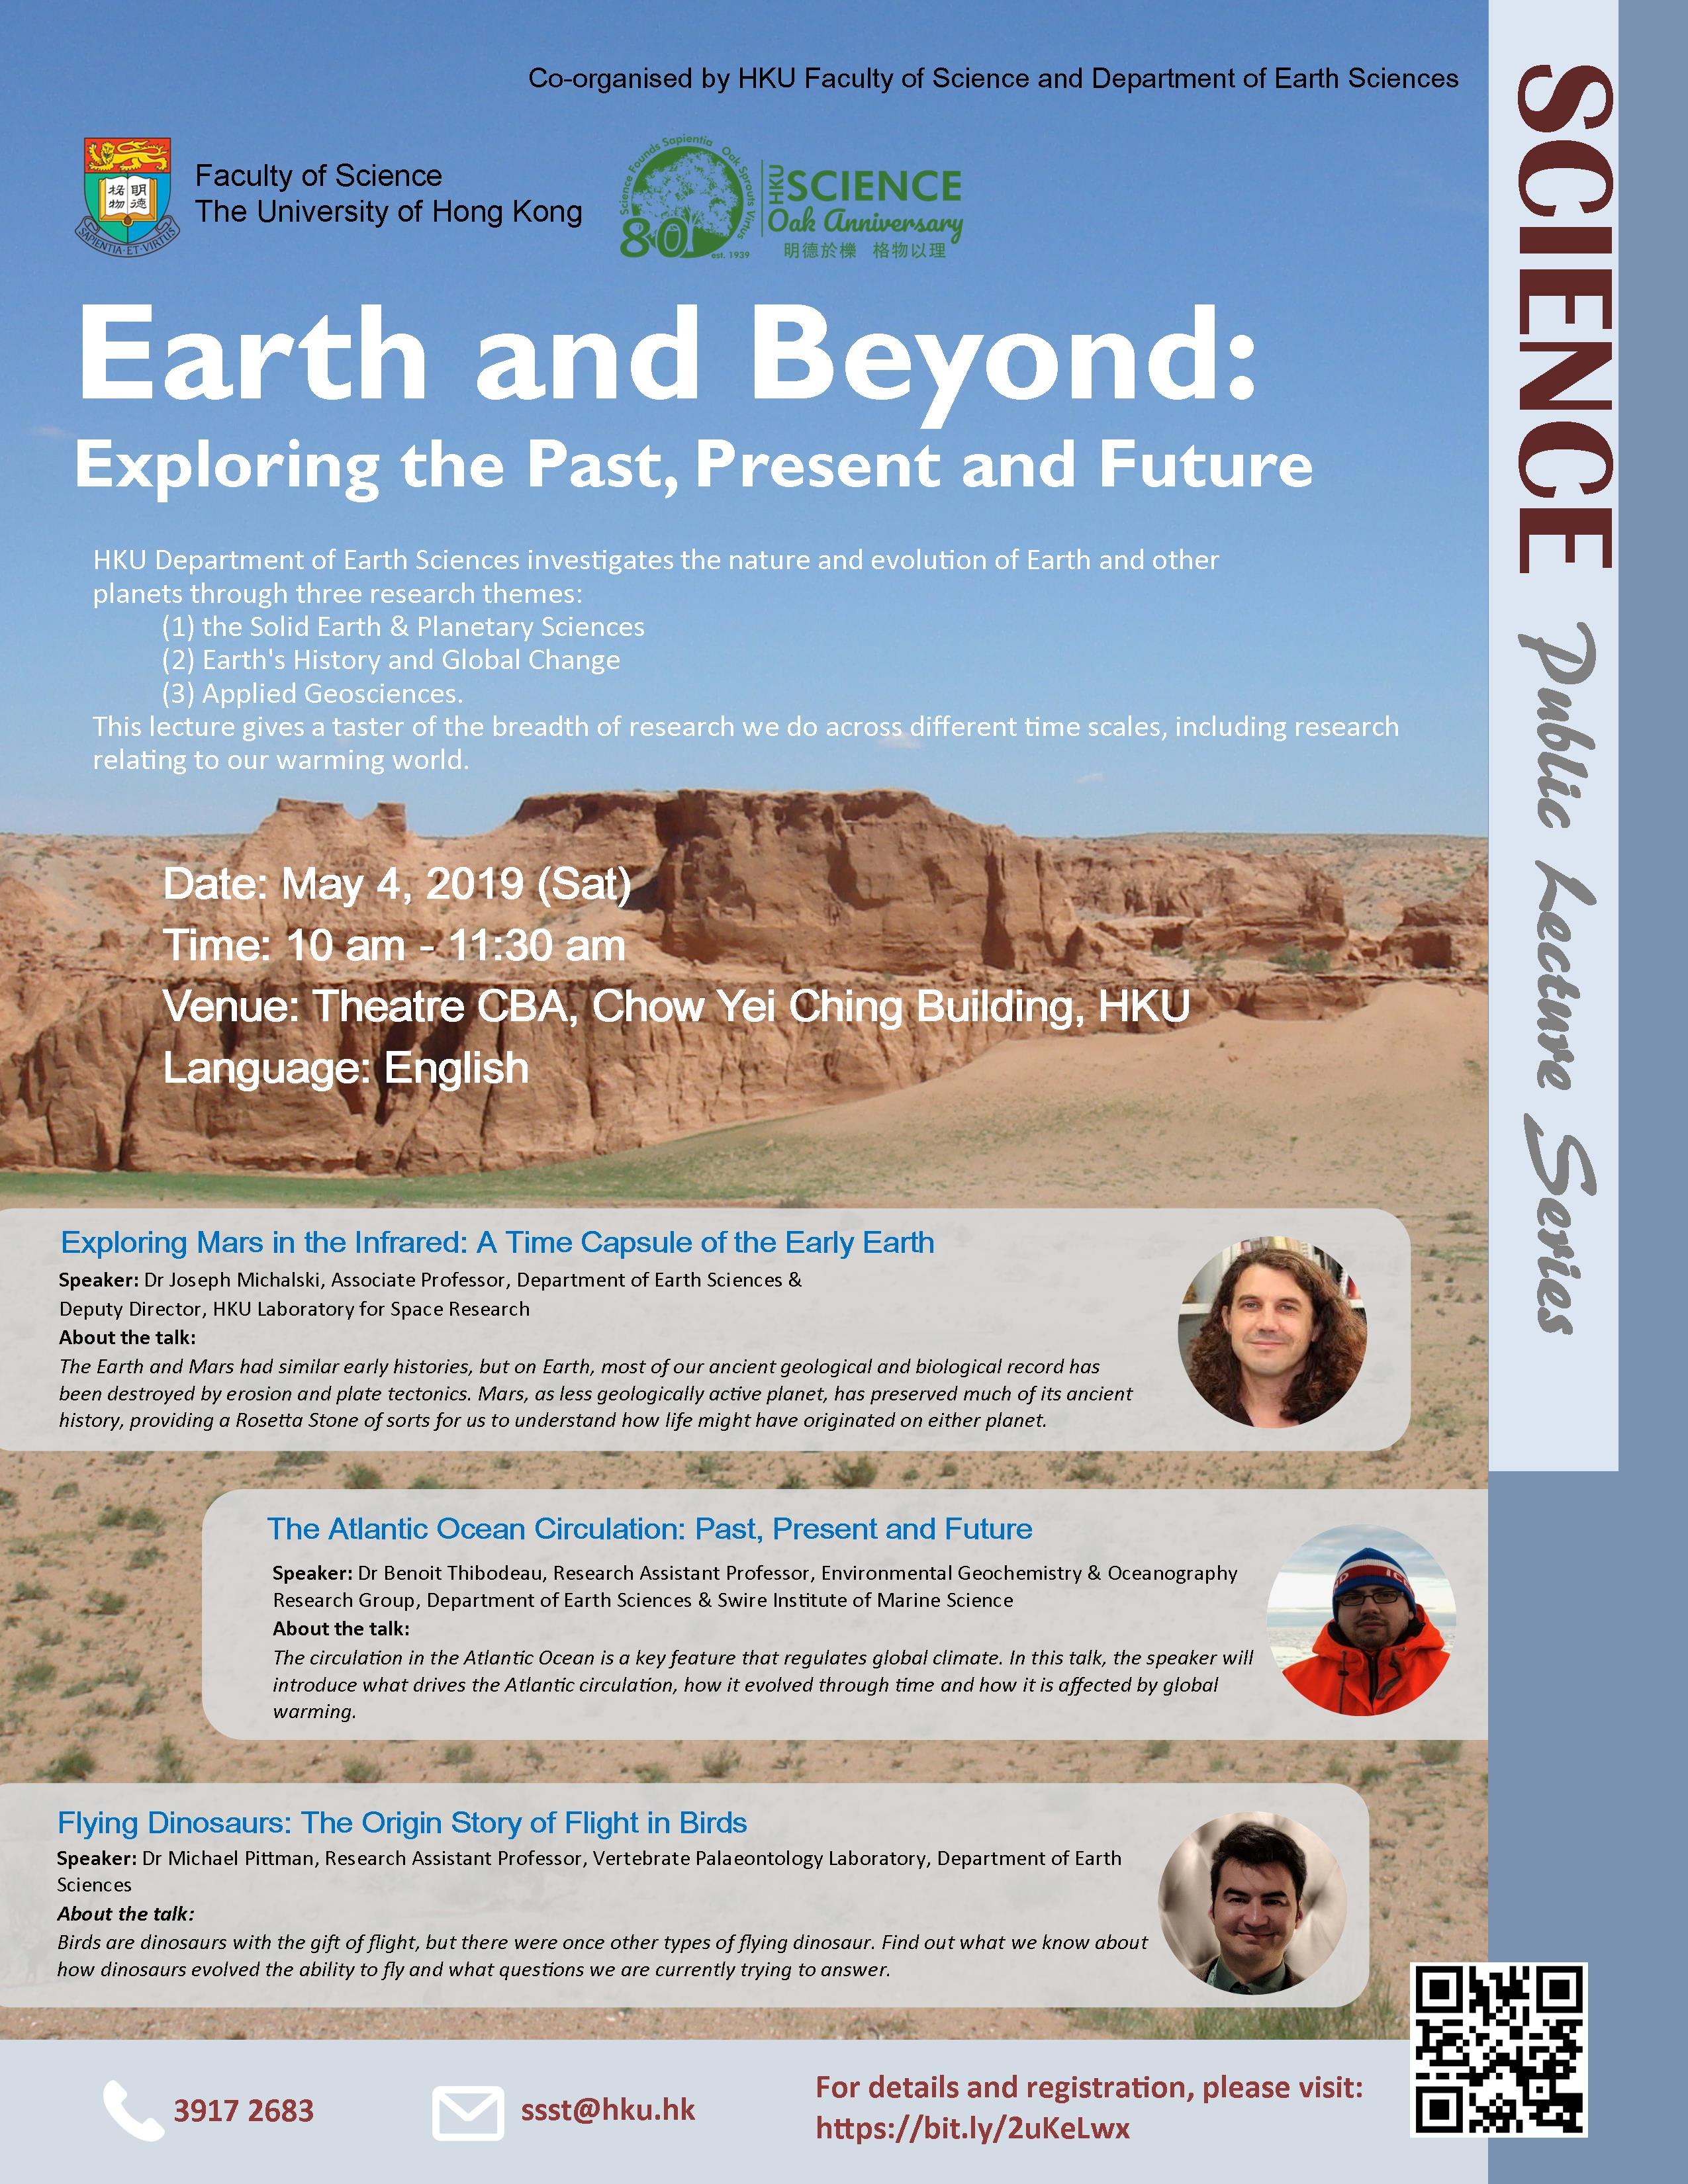 Faculty of Science Oak Anniversary Public Lecture Series: Earth and Beyond: Exploring the Past, Present and Future